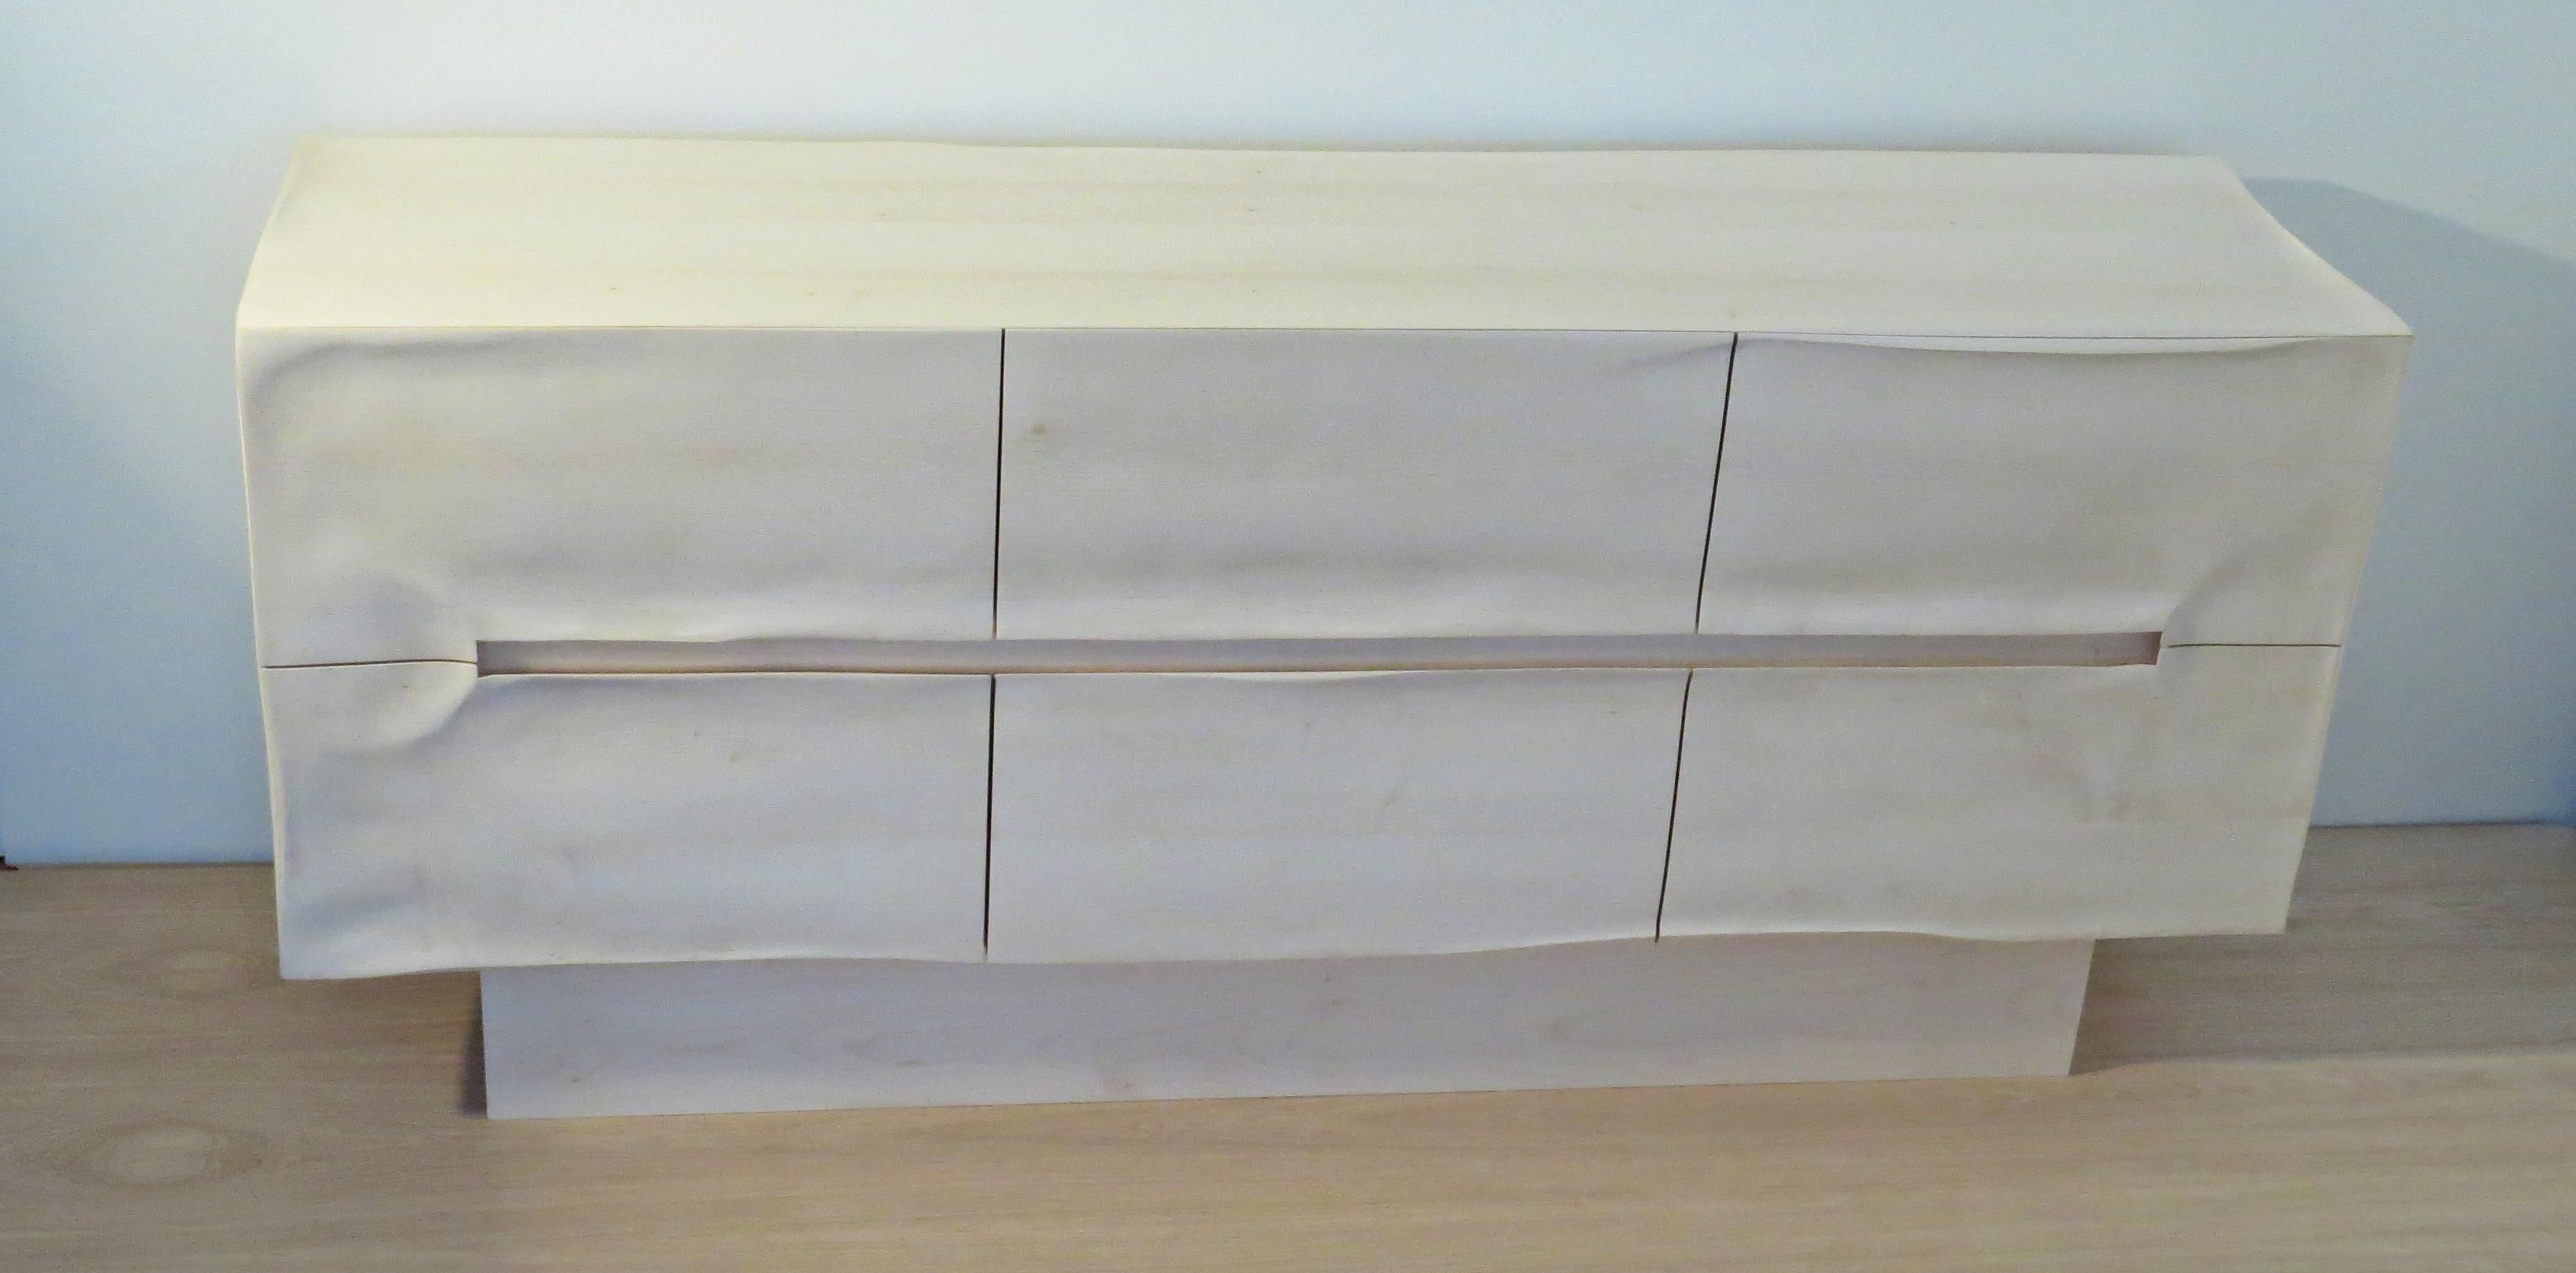 Contemporary Sideboard Solid Wood, Organic Modern Design, Handcrafted in Germany, Sculptural For Sale